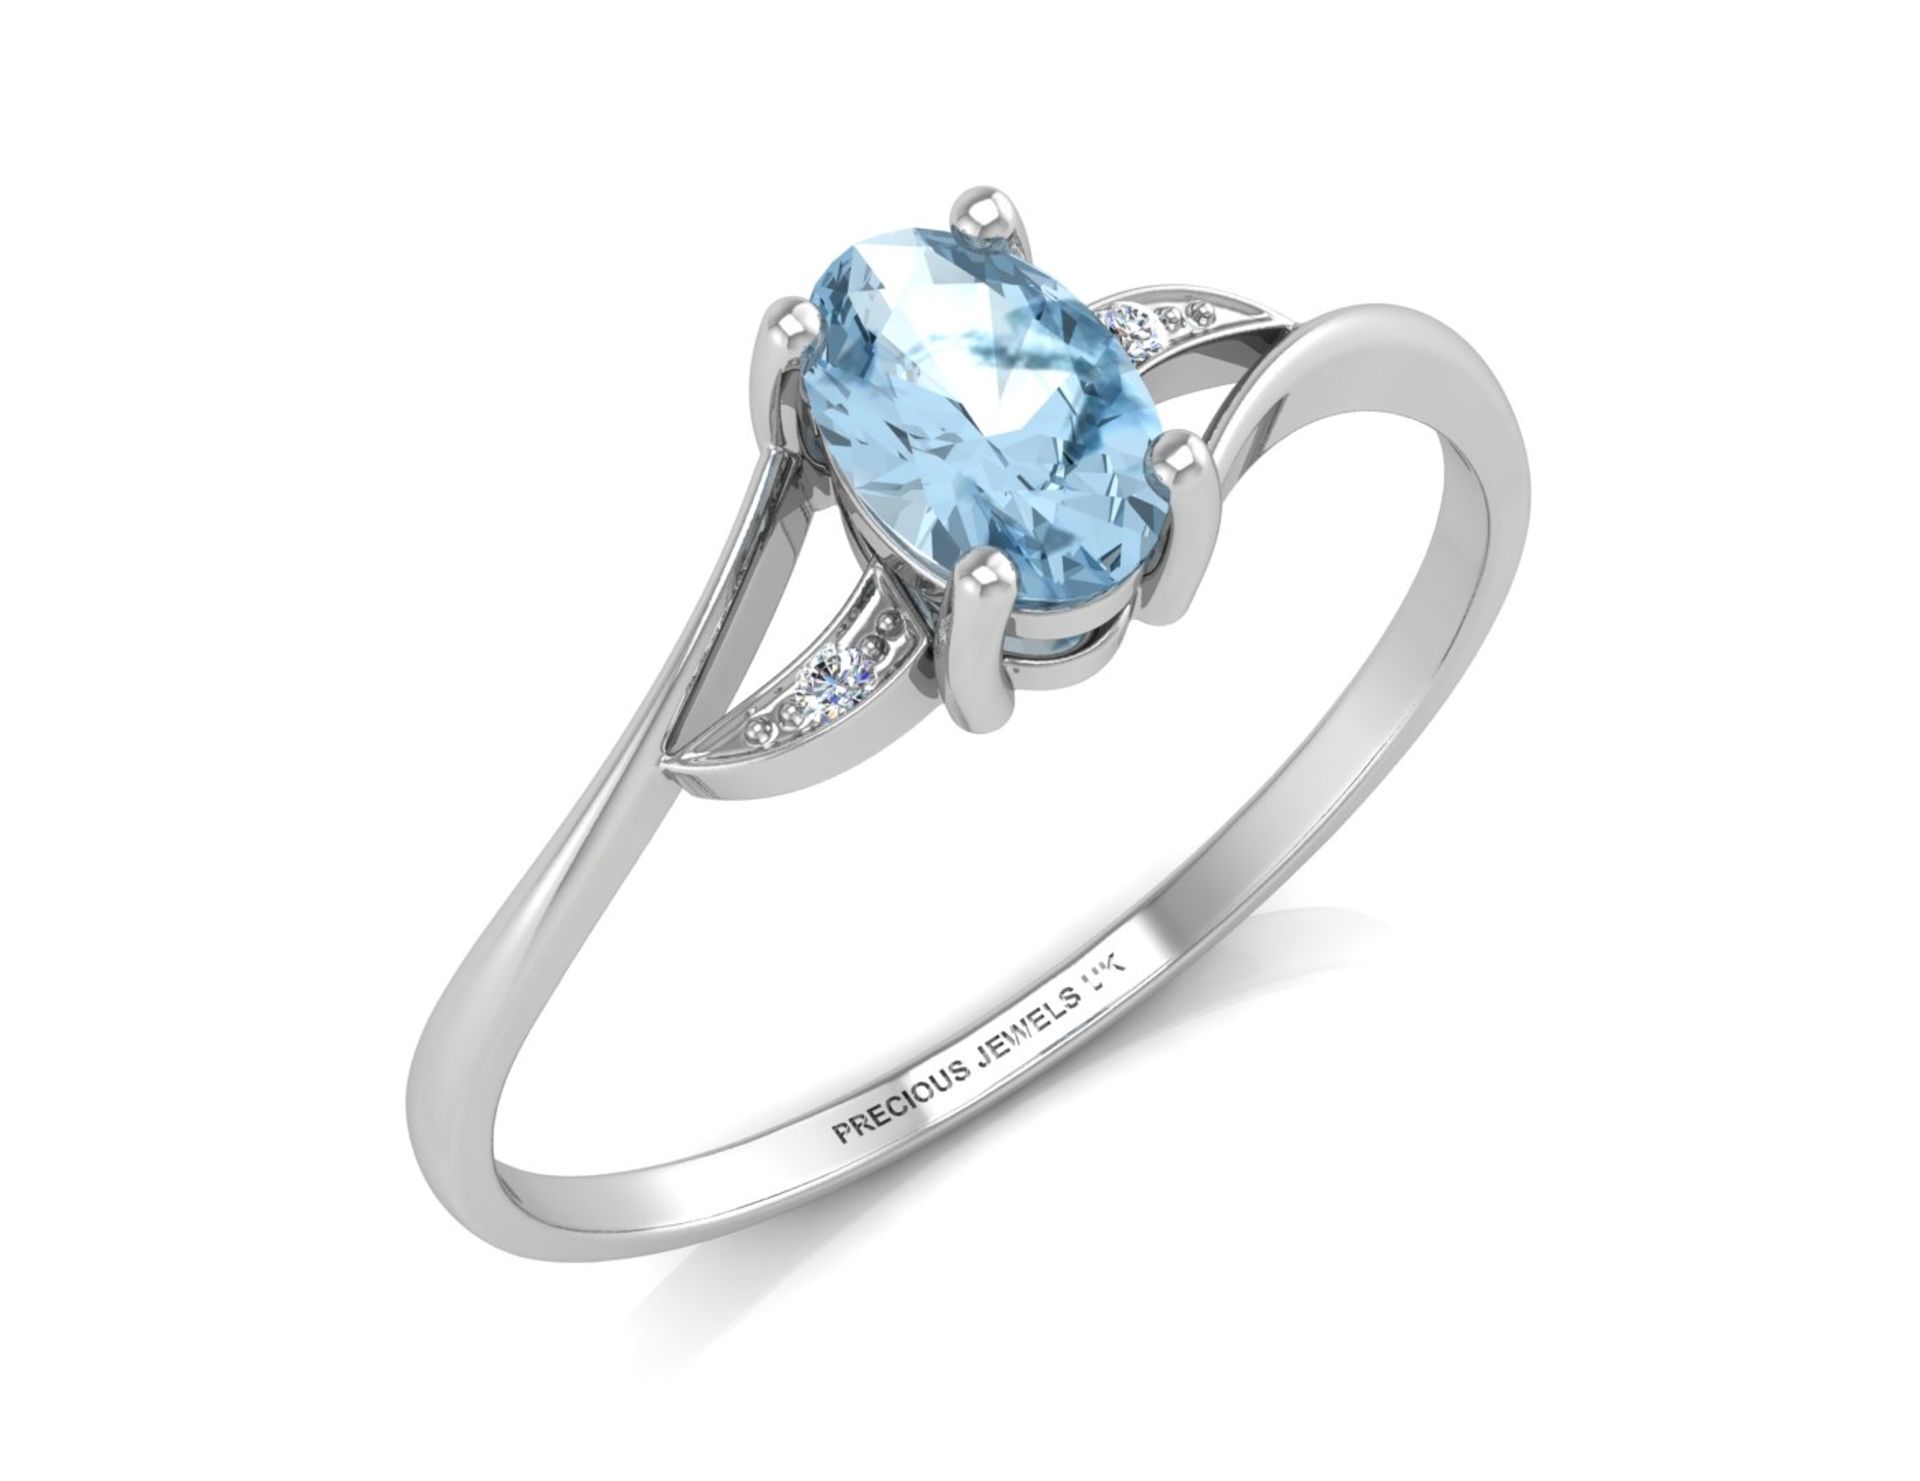 9ct White Gold Diamond And Blue Topaz Ring 0.01 Carats - Valued by GIE £745.00 - 9ct White Gold